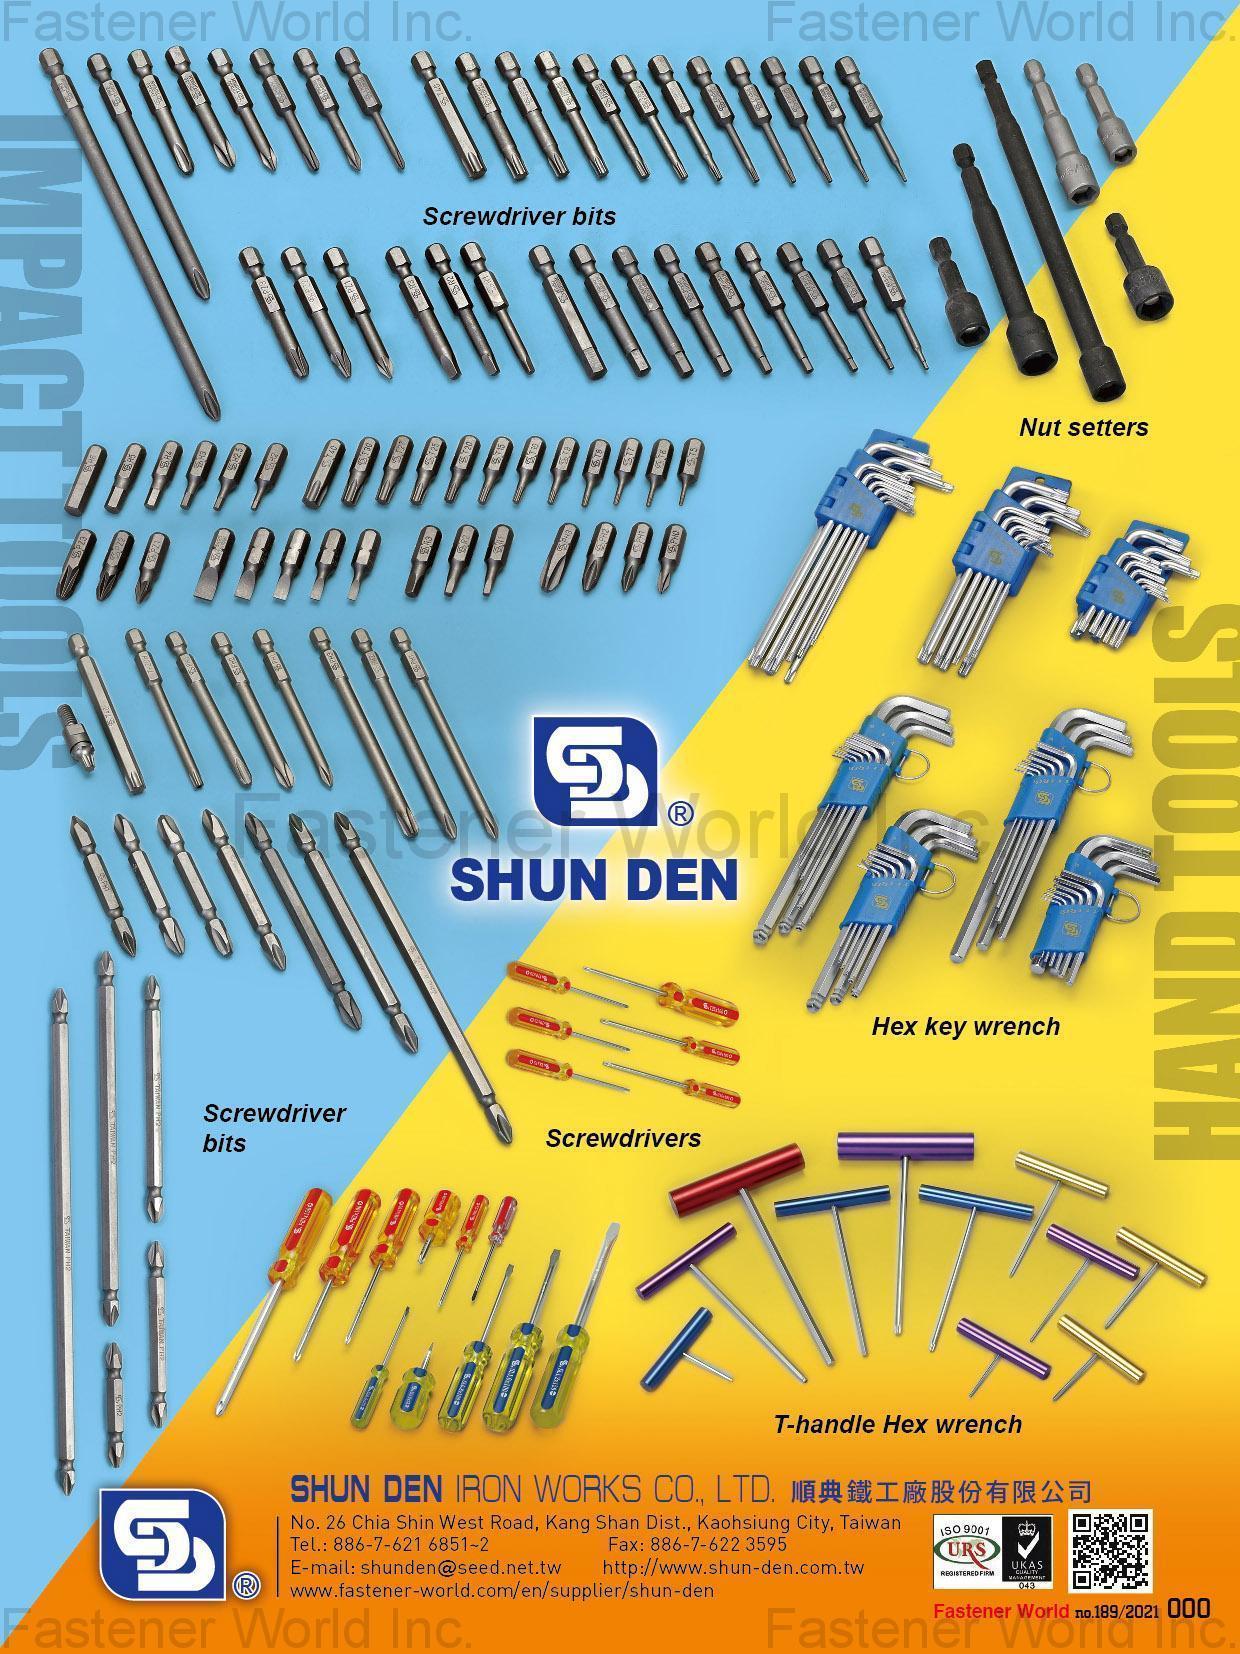 ALISHAN INTERNATIONAL GROUP CO., LTD. , Screwdriver bits, Nut setters, Screwdrivers, Hex Key Wrench, T-handle Hex Wrench